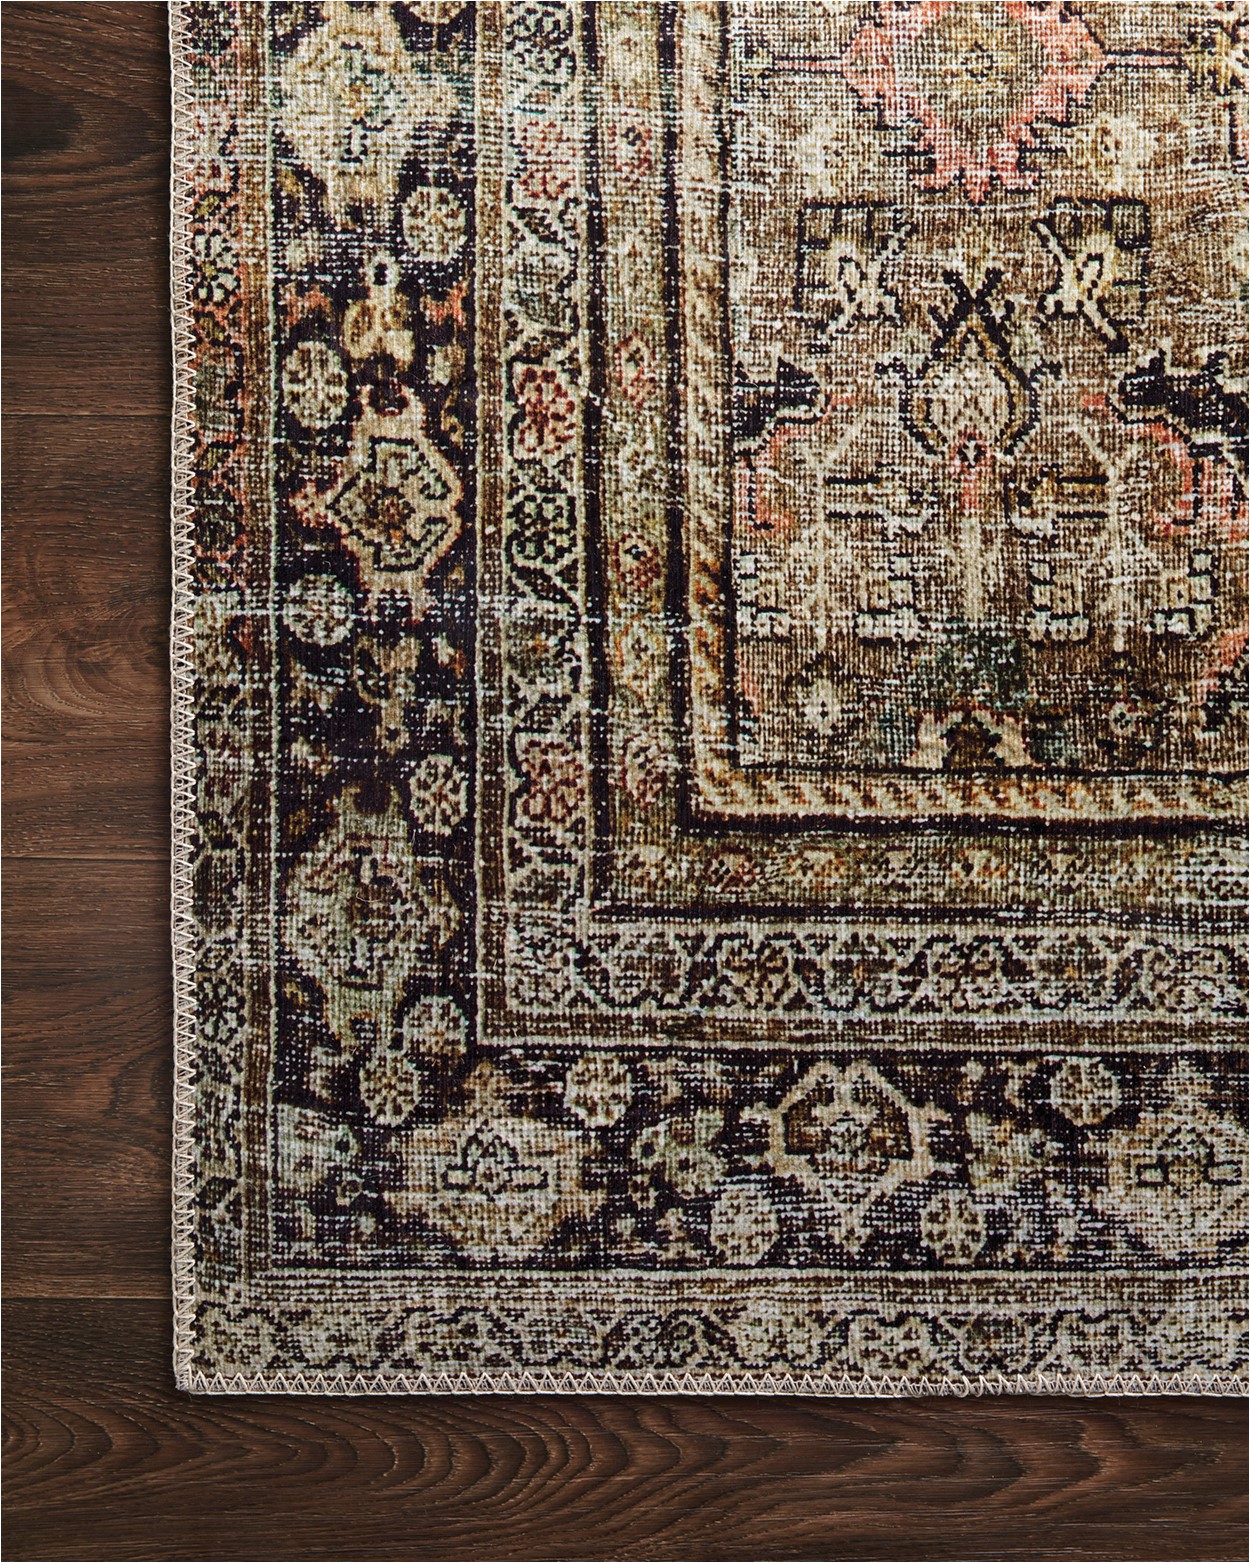 Area Rugs for Sale by Owner Loloi Ii Rugs Layla Printed Lay 03 area Rugs